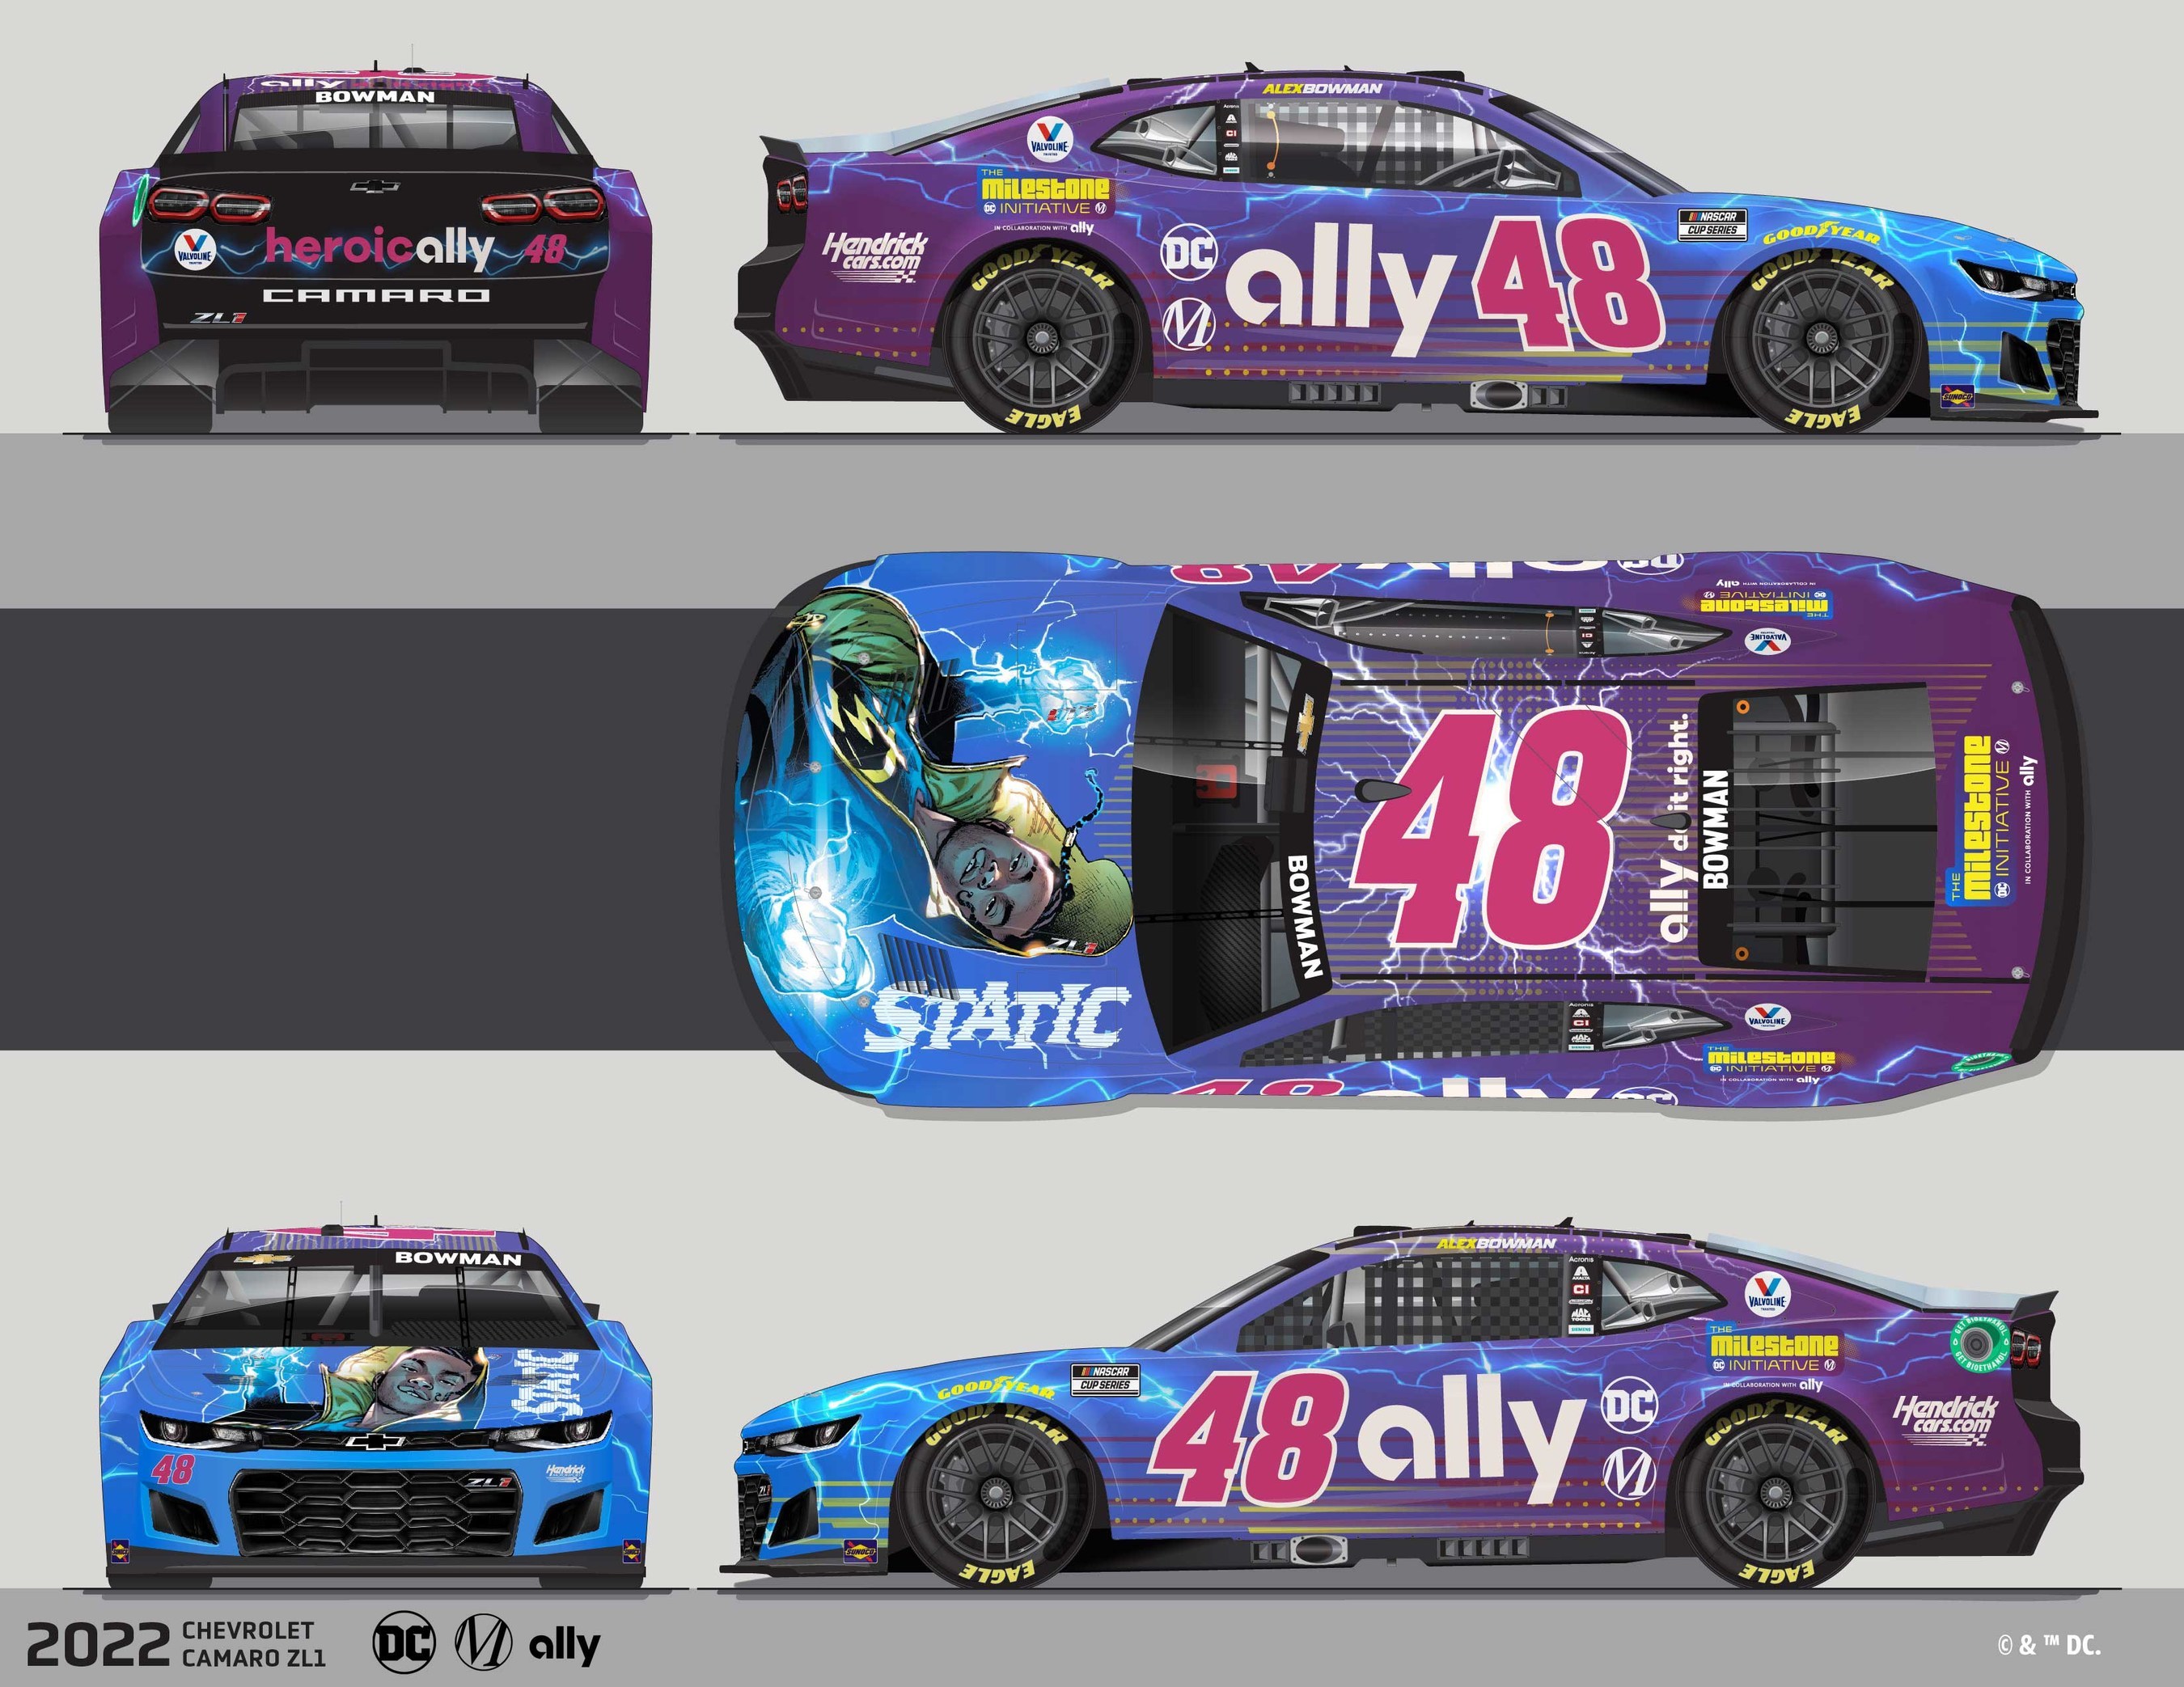 Ally Financial, Milestone Media, DC, and Warner Bros. Discovery today unveiled a new paint scheme for the Ally-sponsored No. 48 Chevrolet Camaro ZL1 1LE of Hendrick Motorsports, in support of their joint program, The Milestone Initiative.